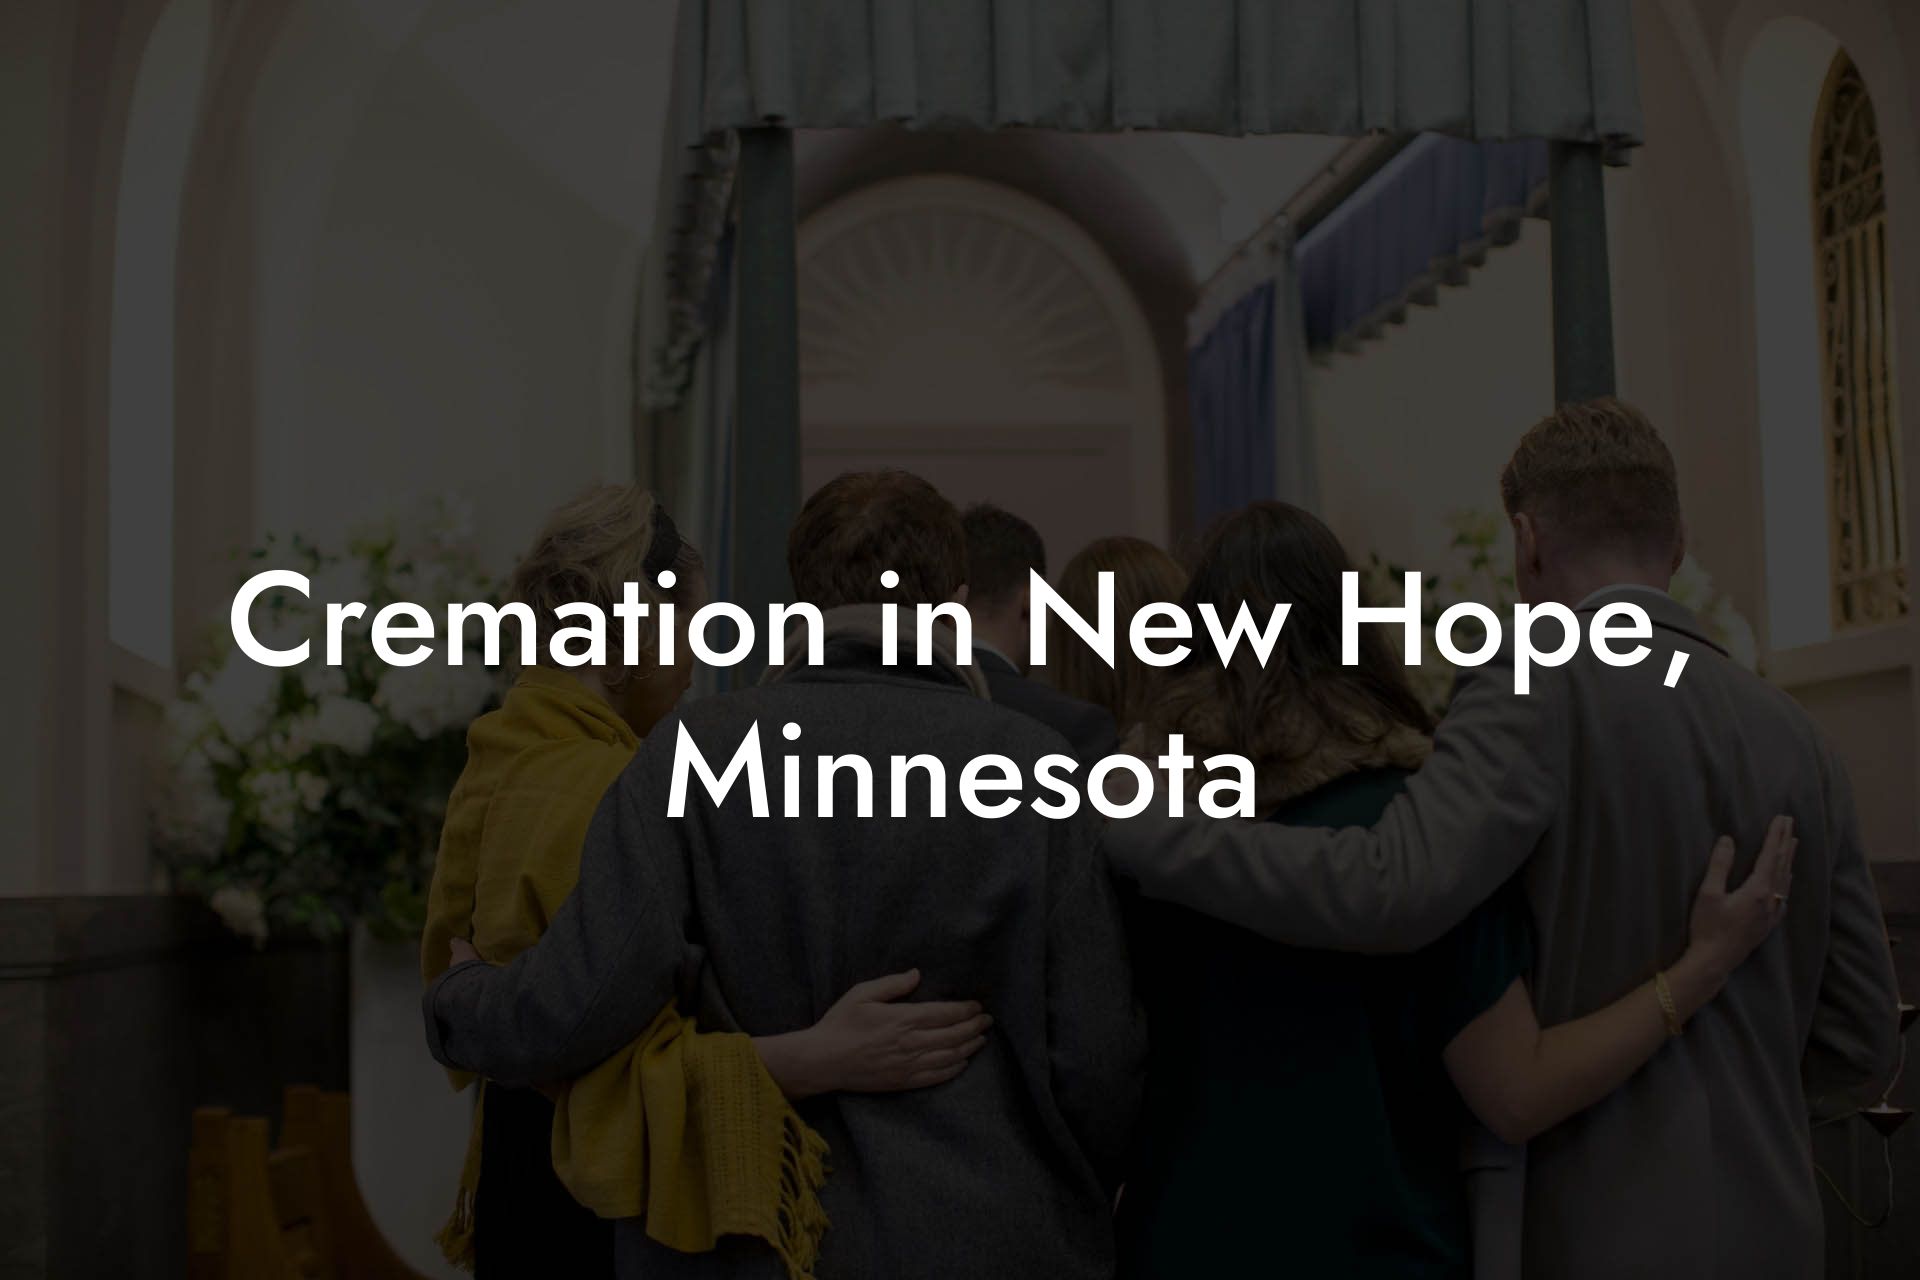 Cremation in New Hope, Minnesota